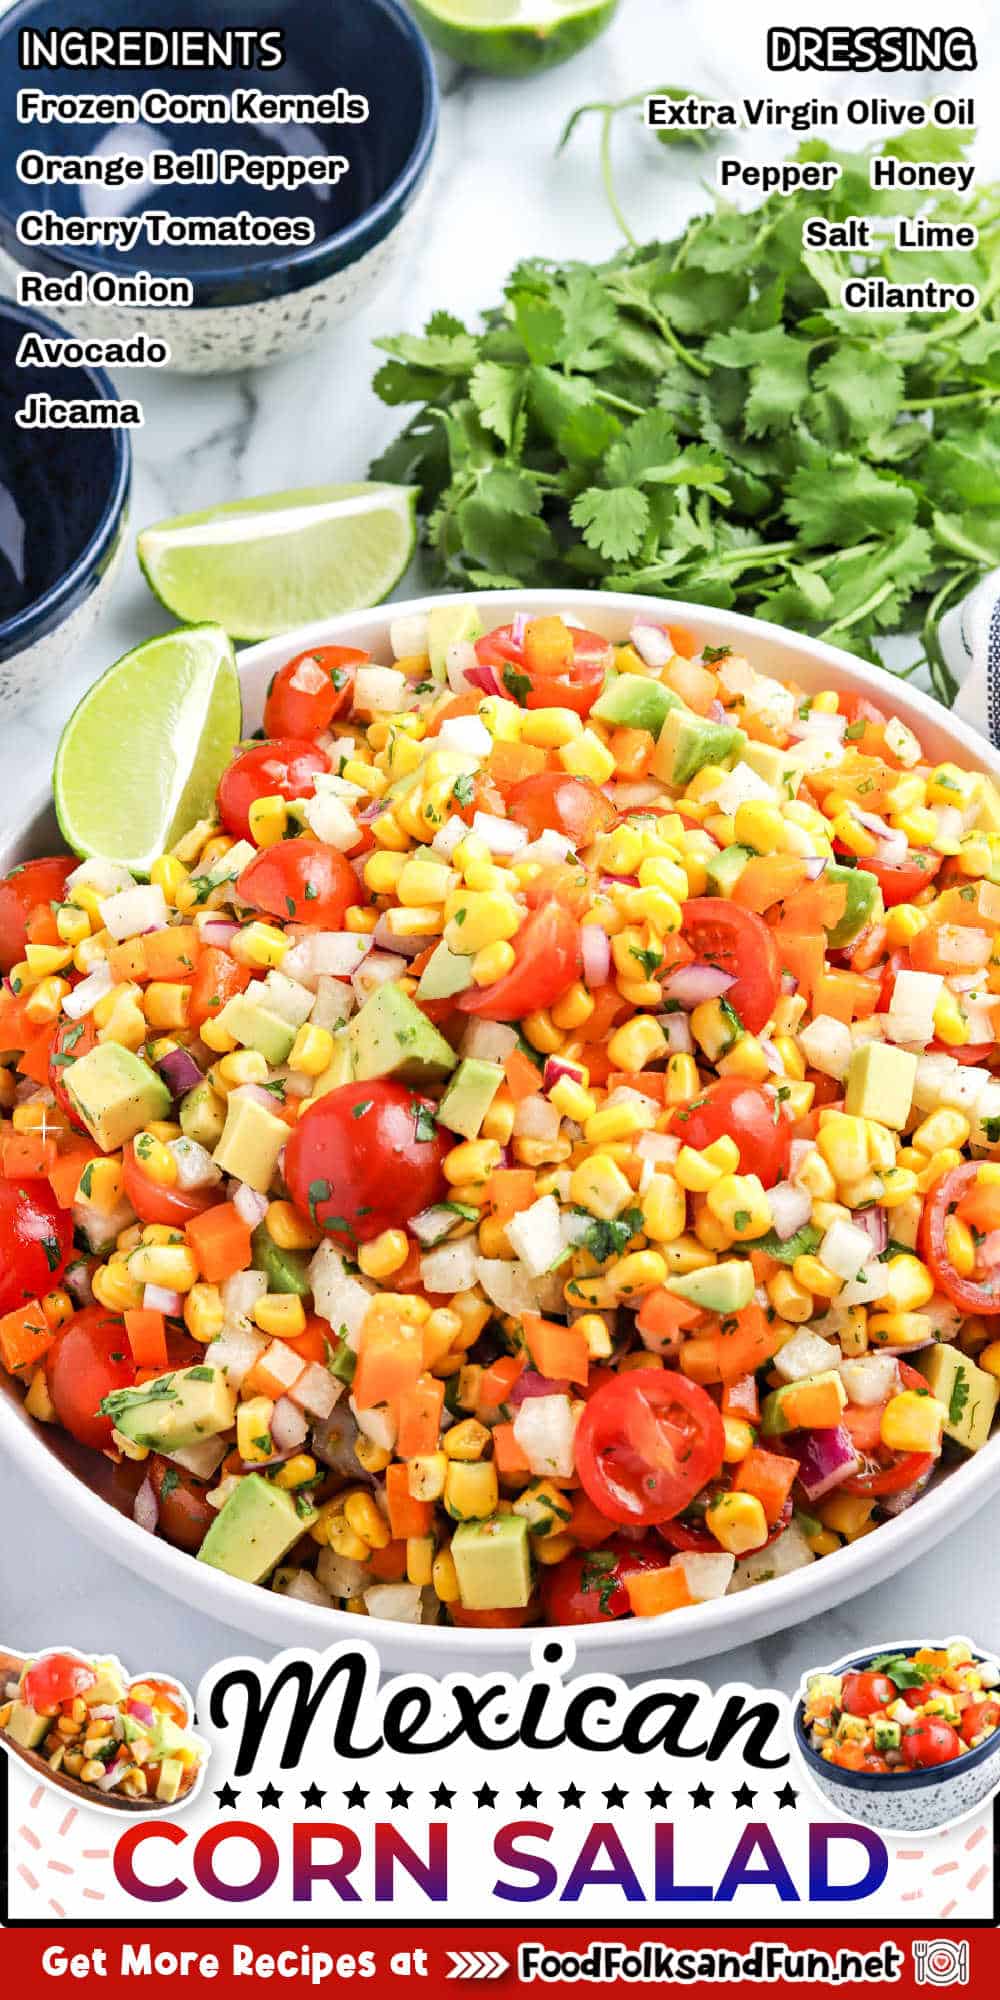 Mexican Corn Salad or Confetti Corn is a light and refreshing Mexican-inspired side dish that pairs well with any Mexican dish. This salad recipe is so bold and flavorful you’ll want to make it repeatedly.
 via @foodfolksandfun